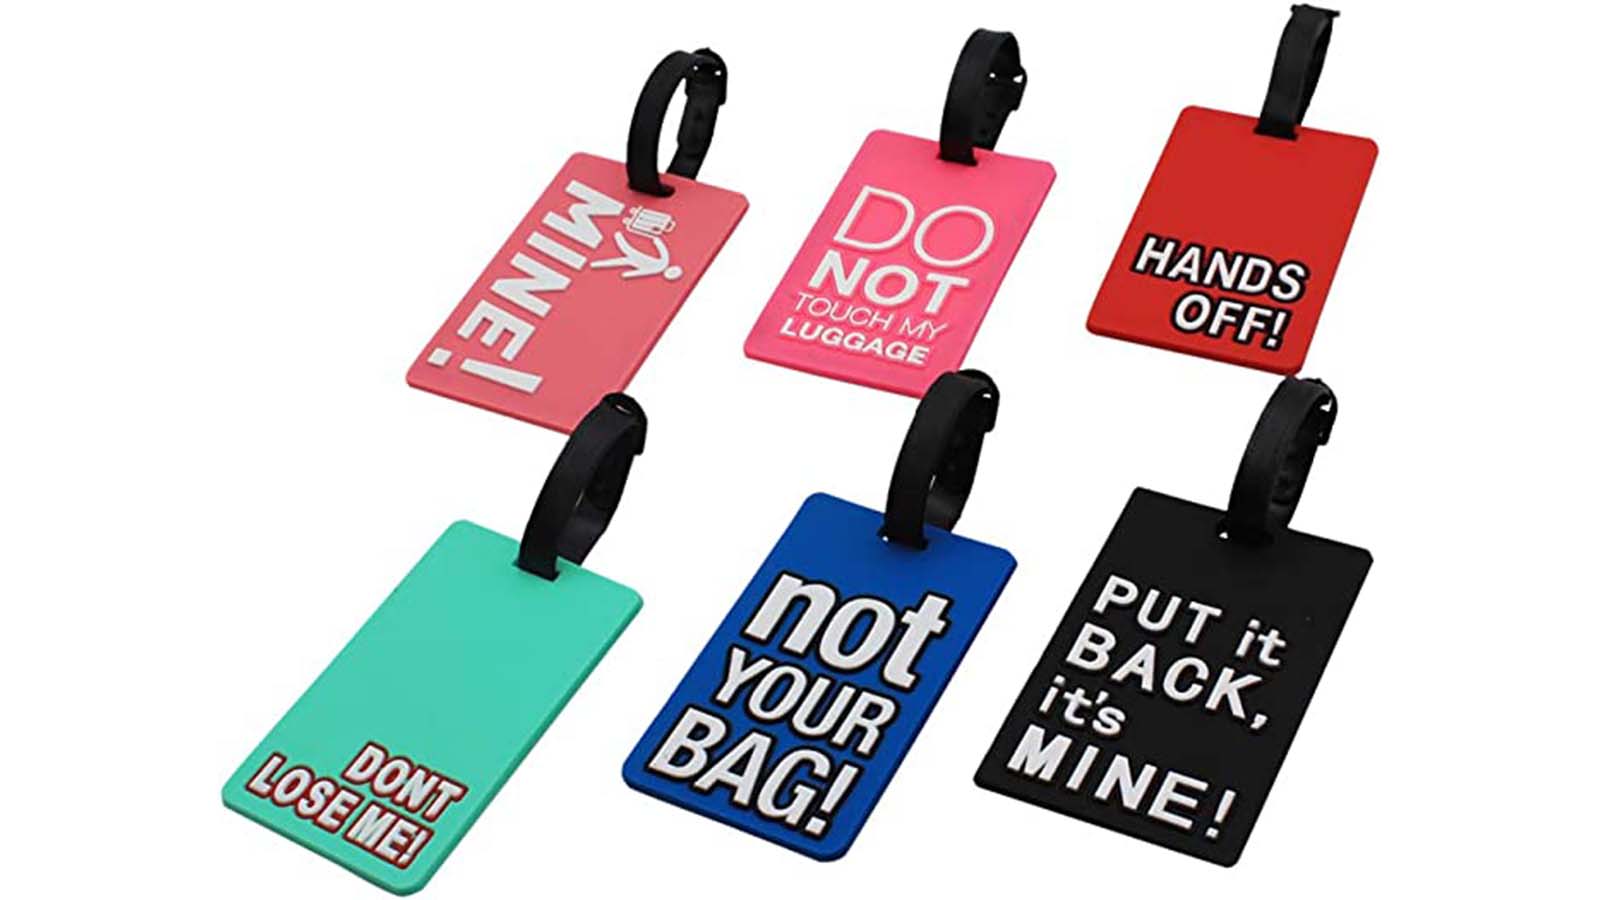 This can also be used to put your luggage tags on your handbags